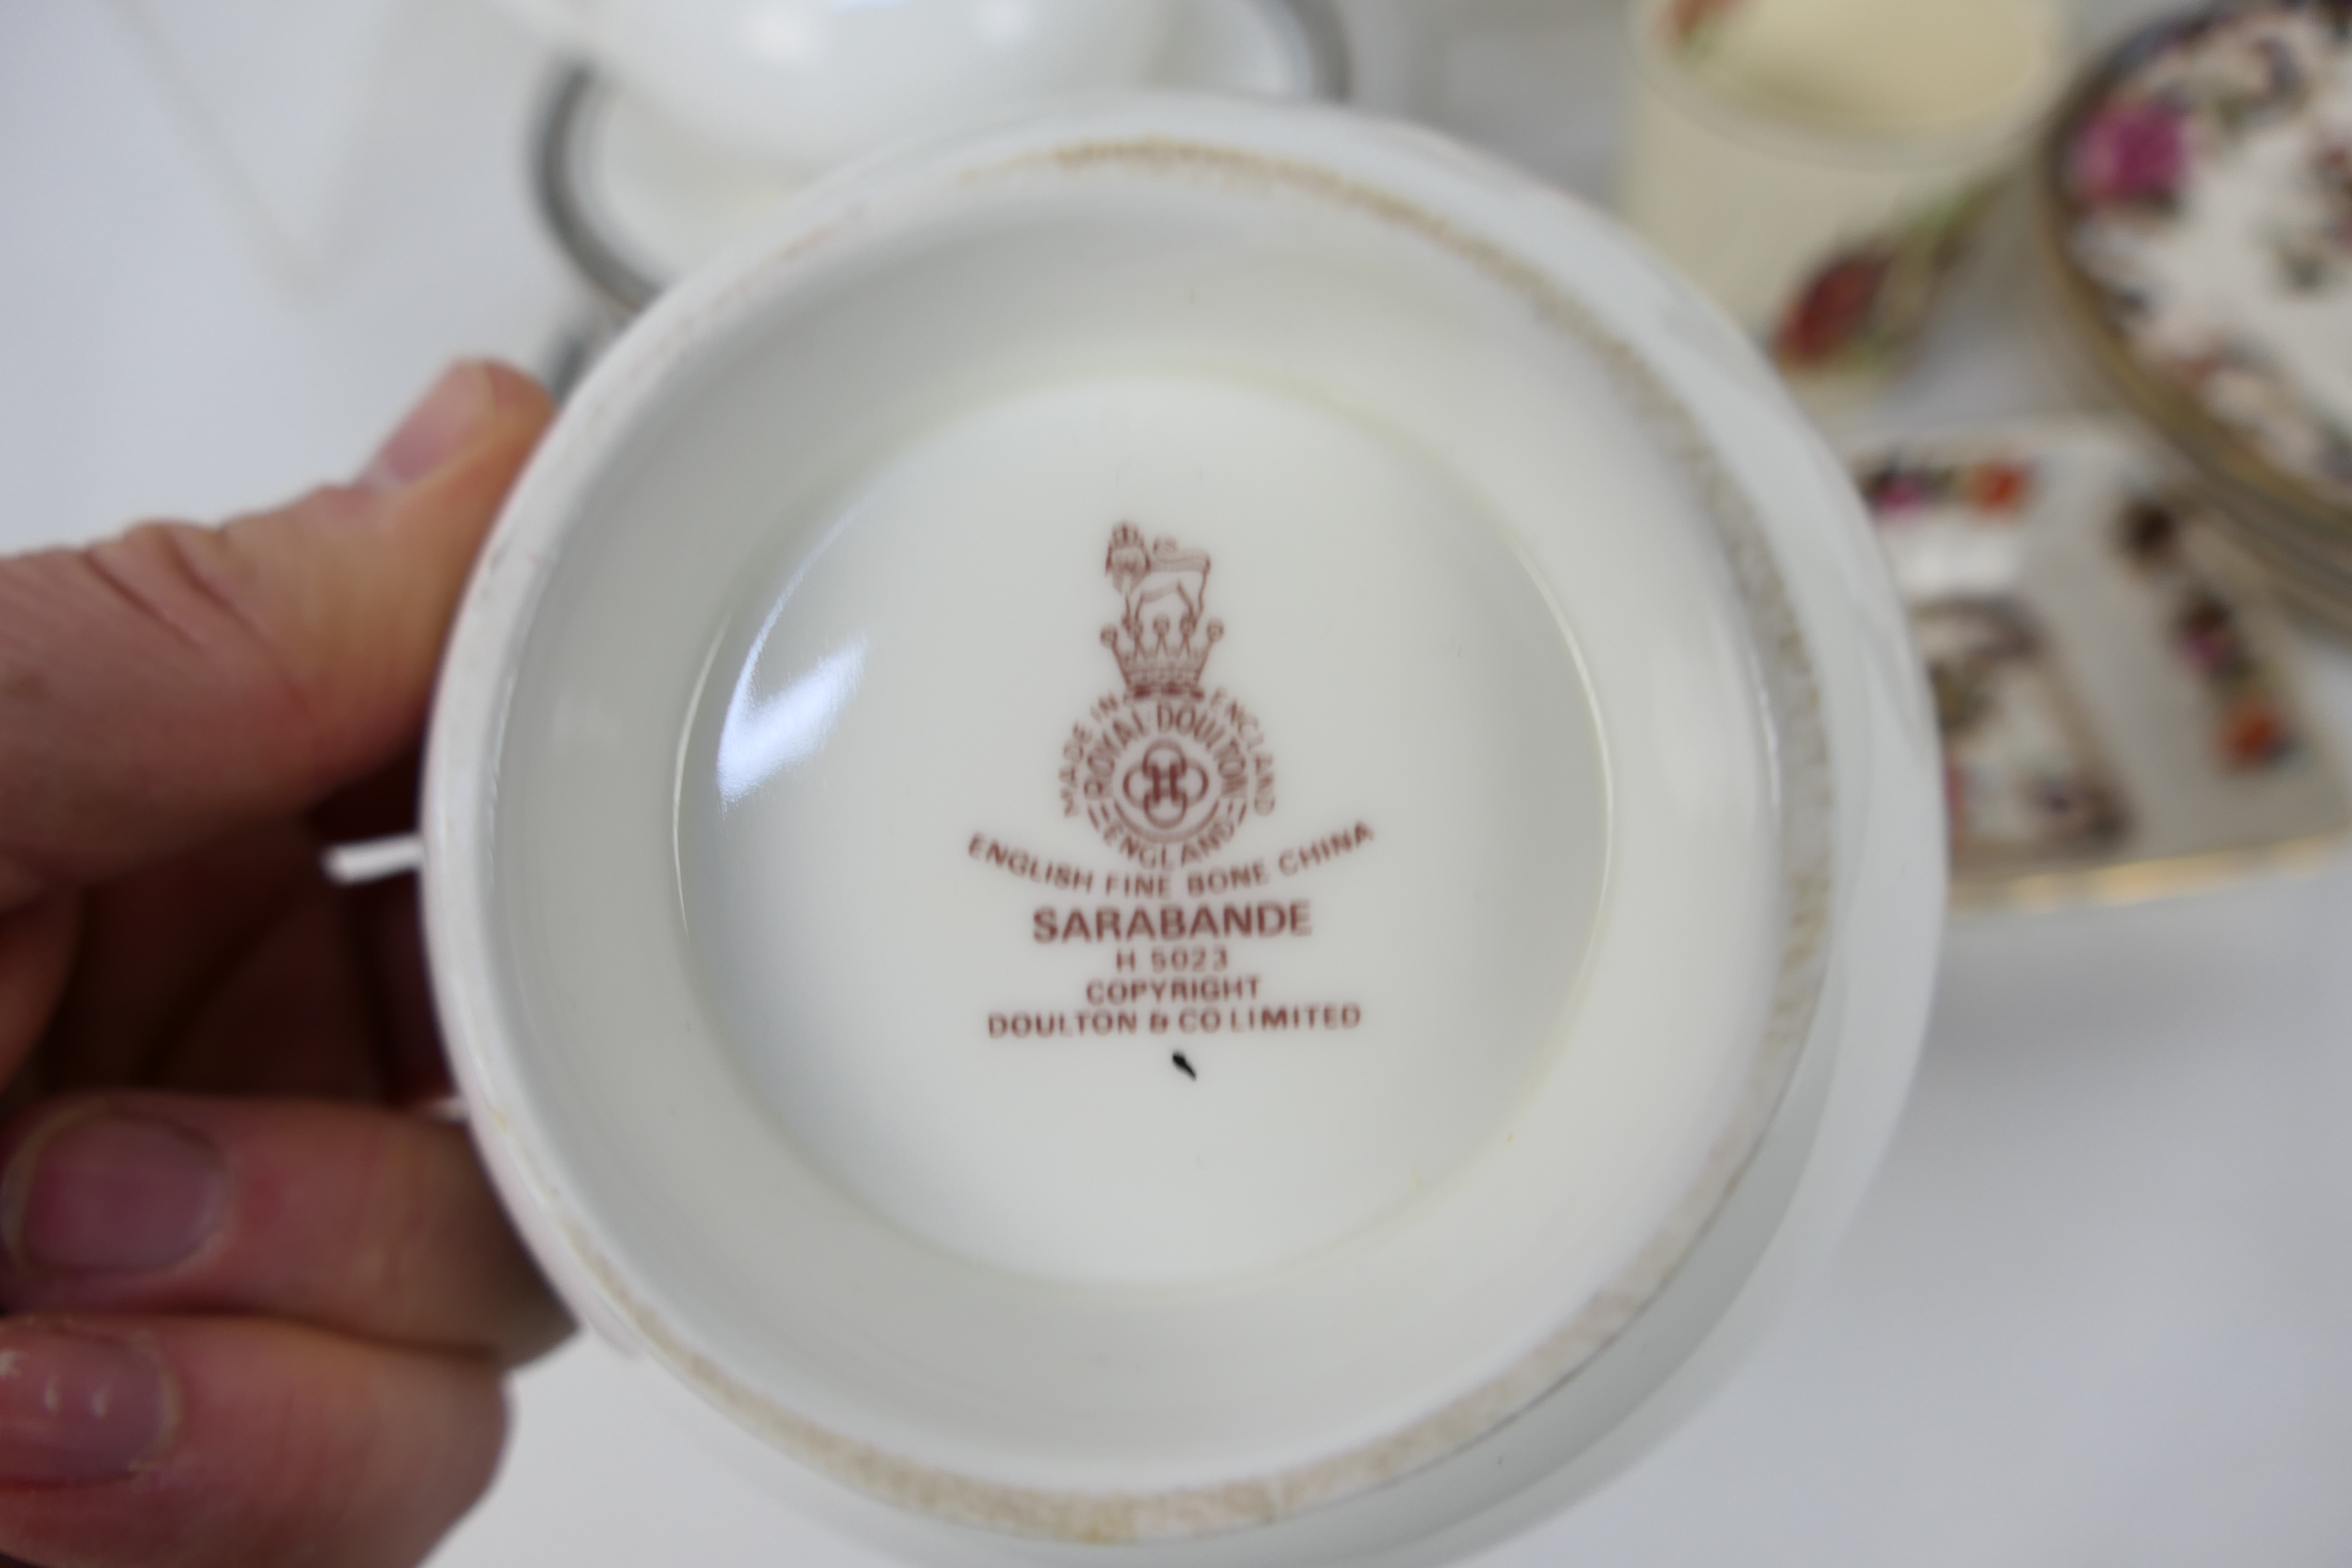 Ceramics to include Royal Doulton tea wares in the Sarabande pattern # H5023, - Image 4 of 5